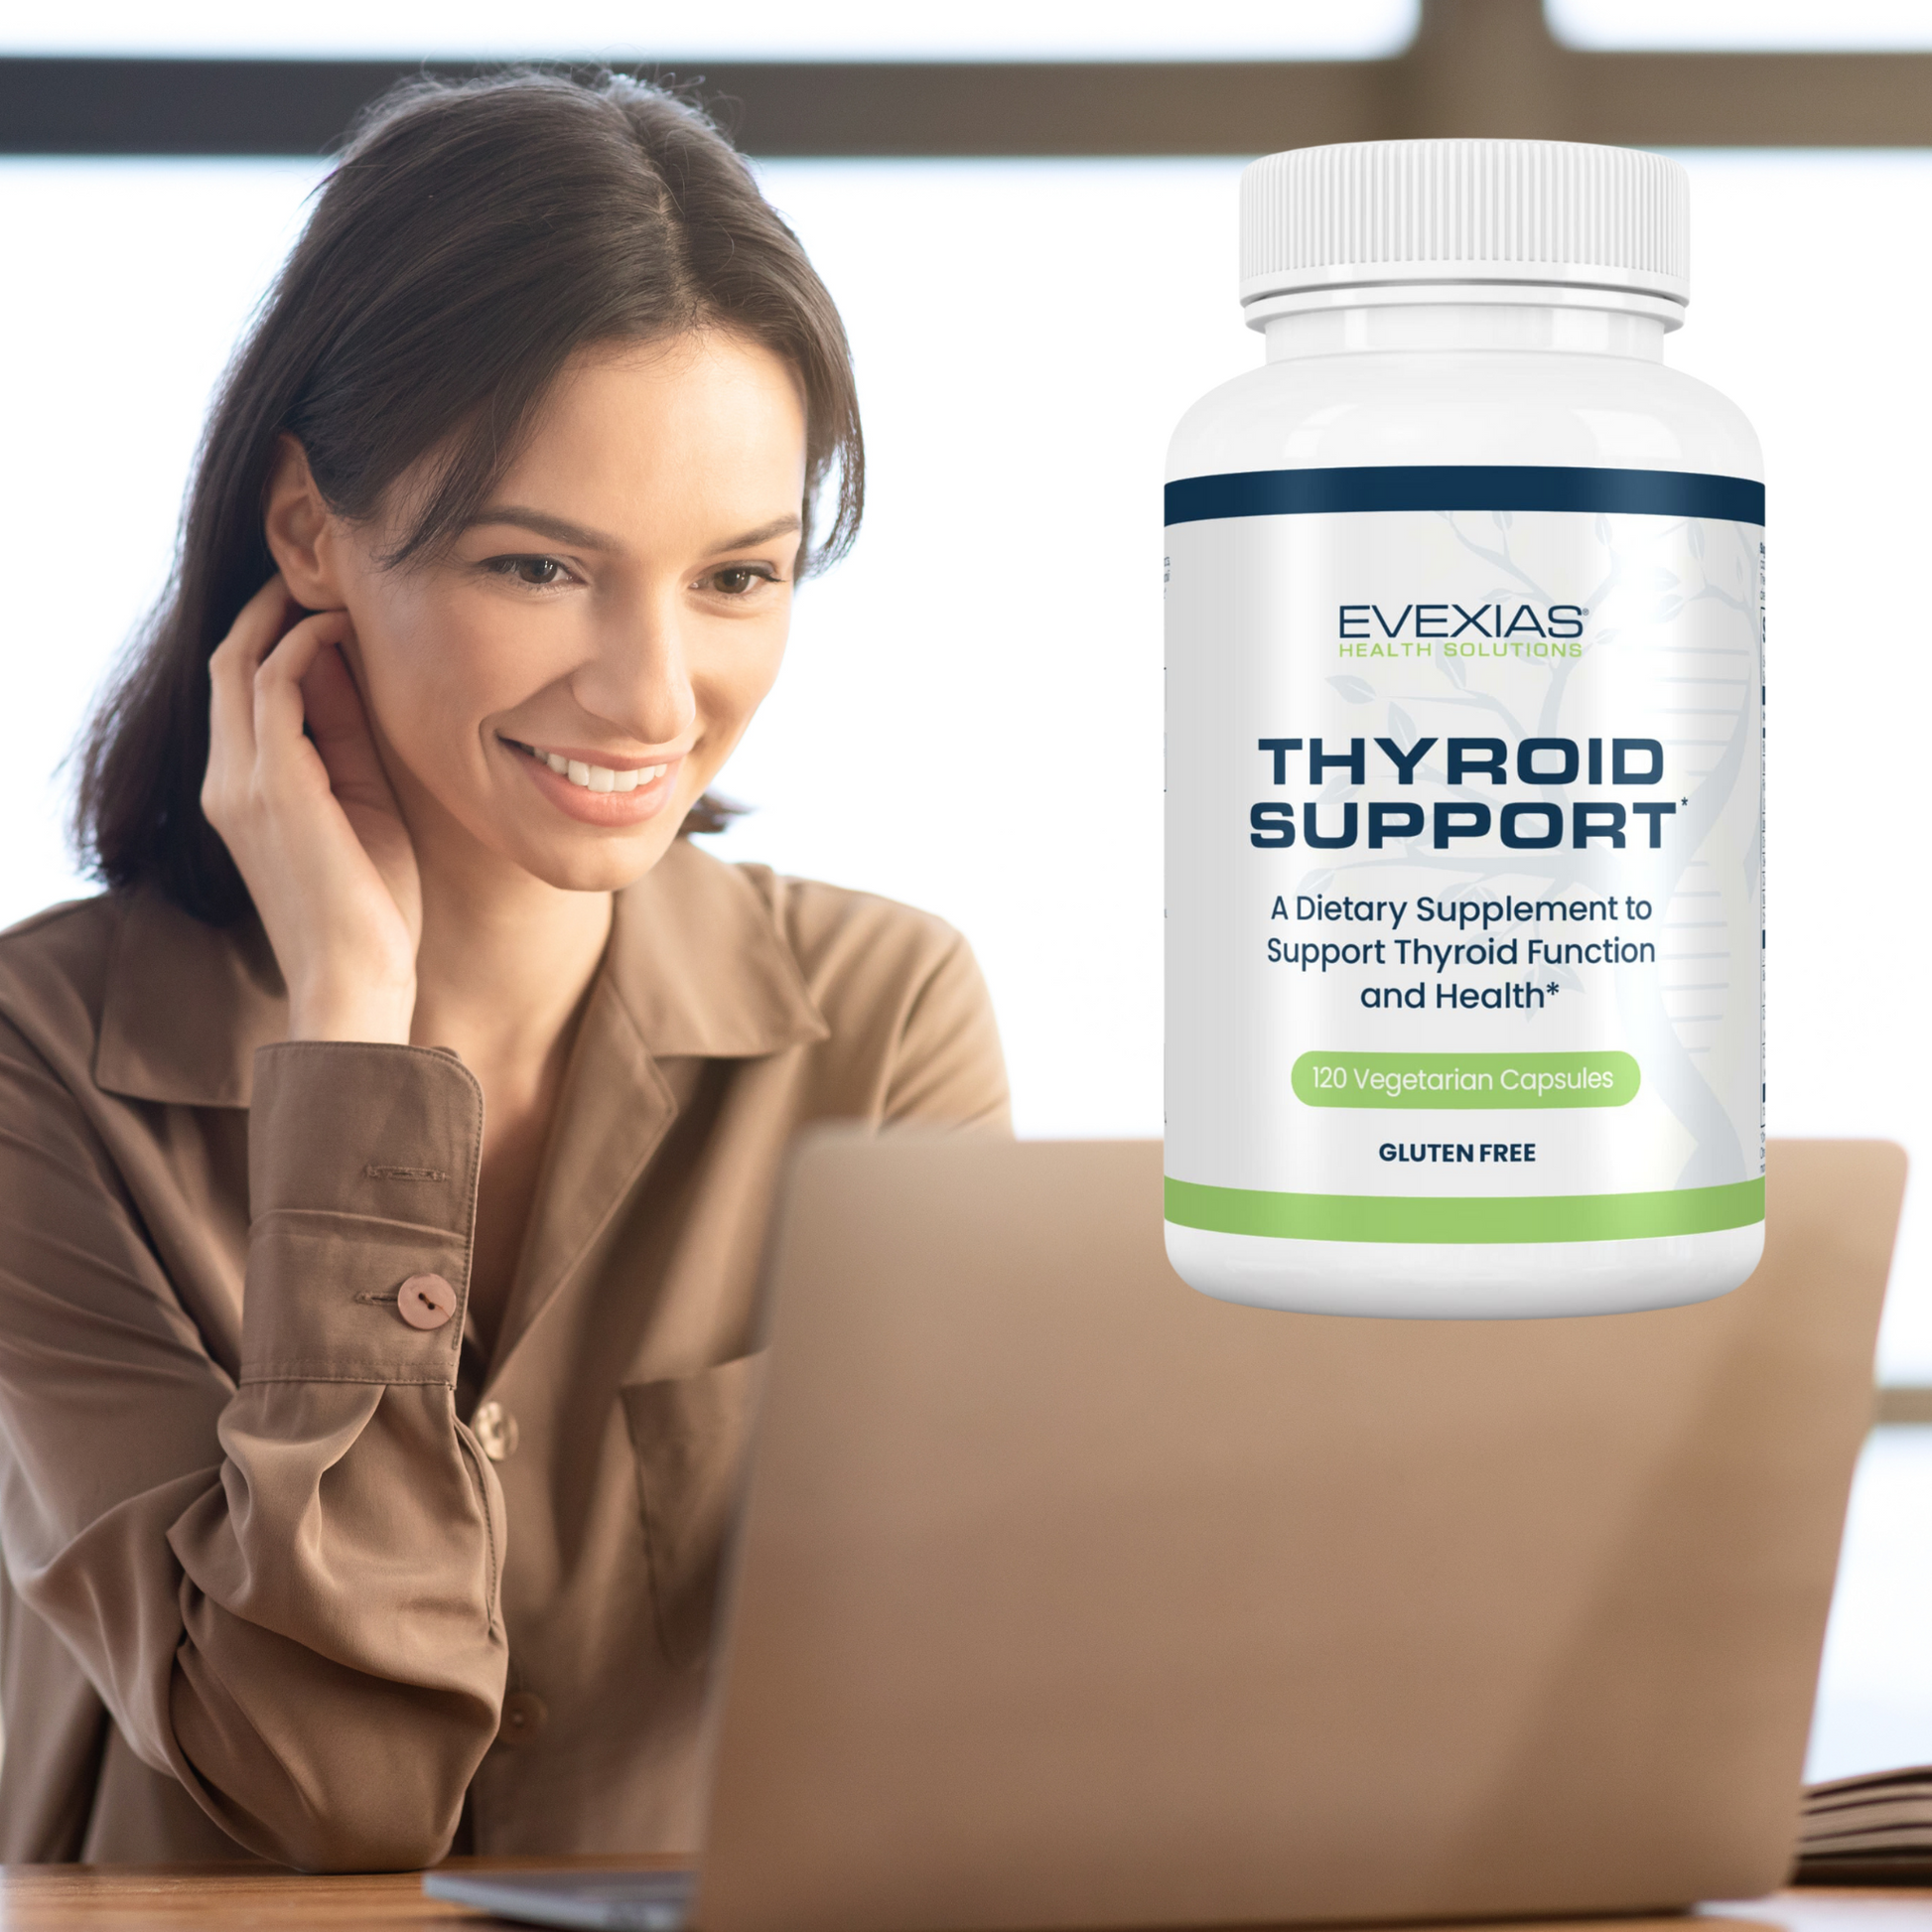 Thyroid Support Evexias use